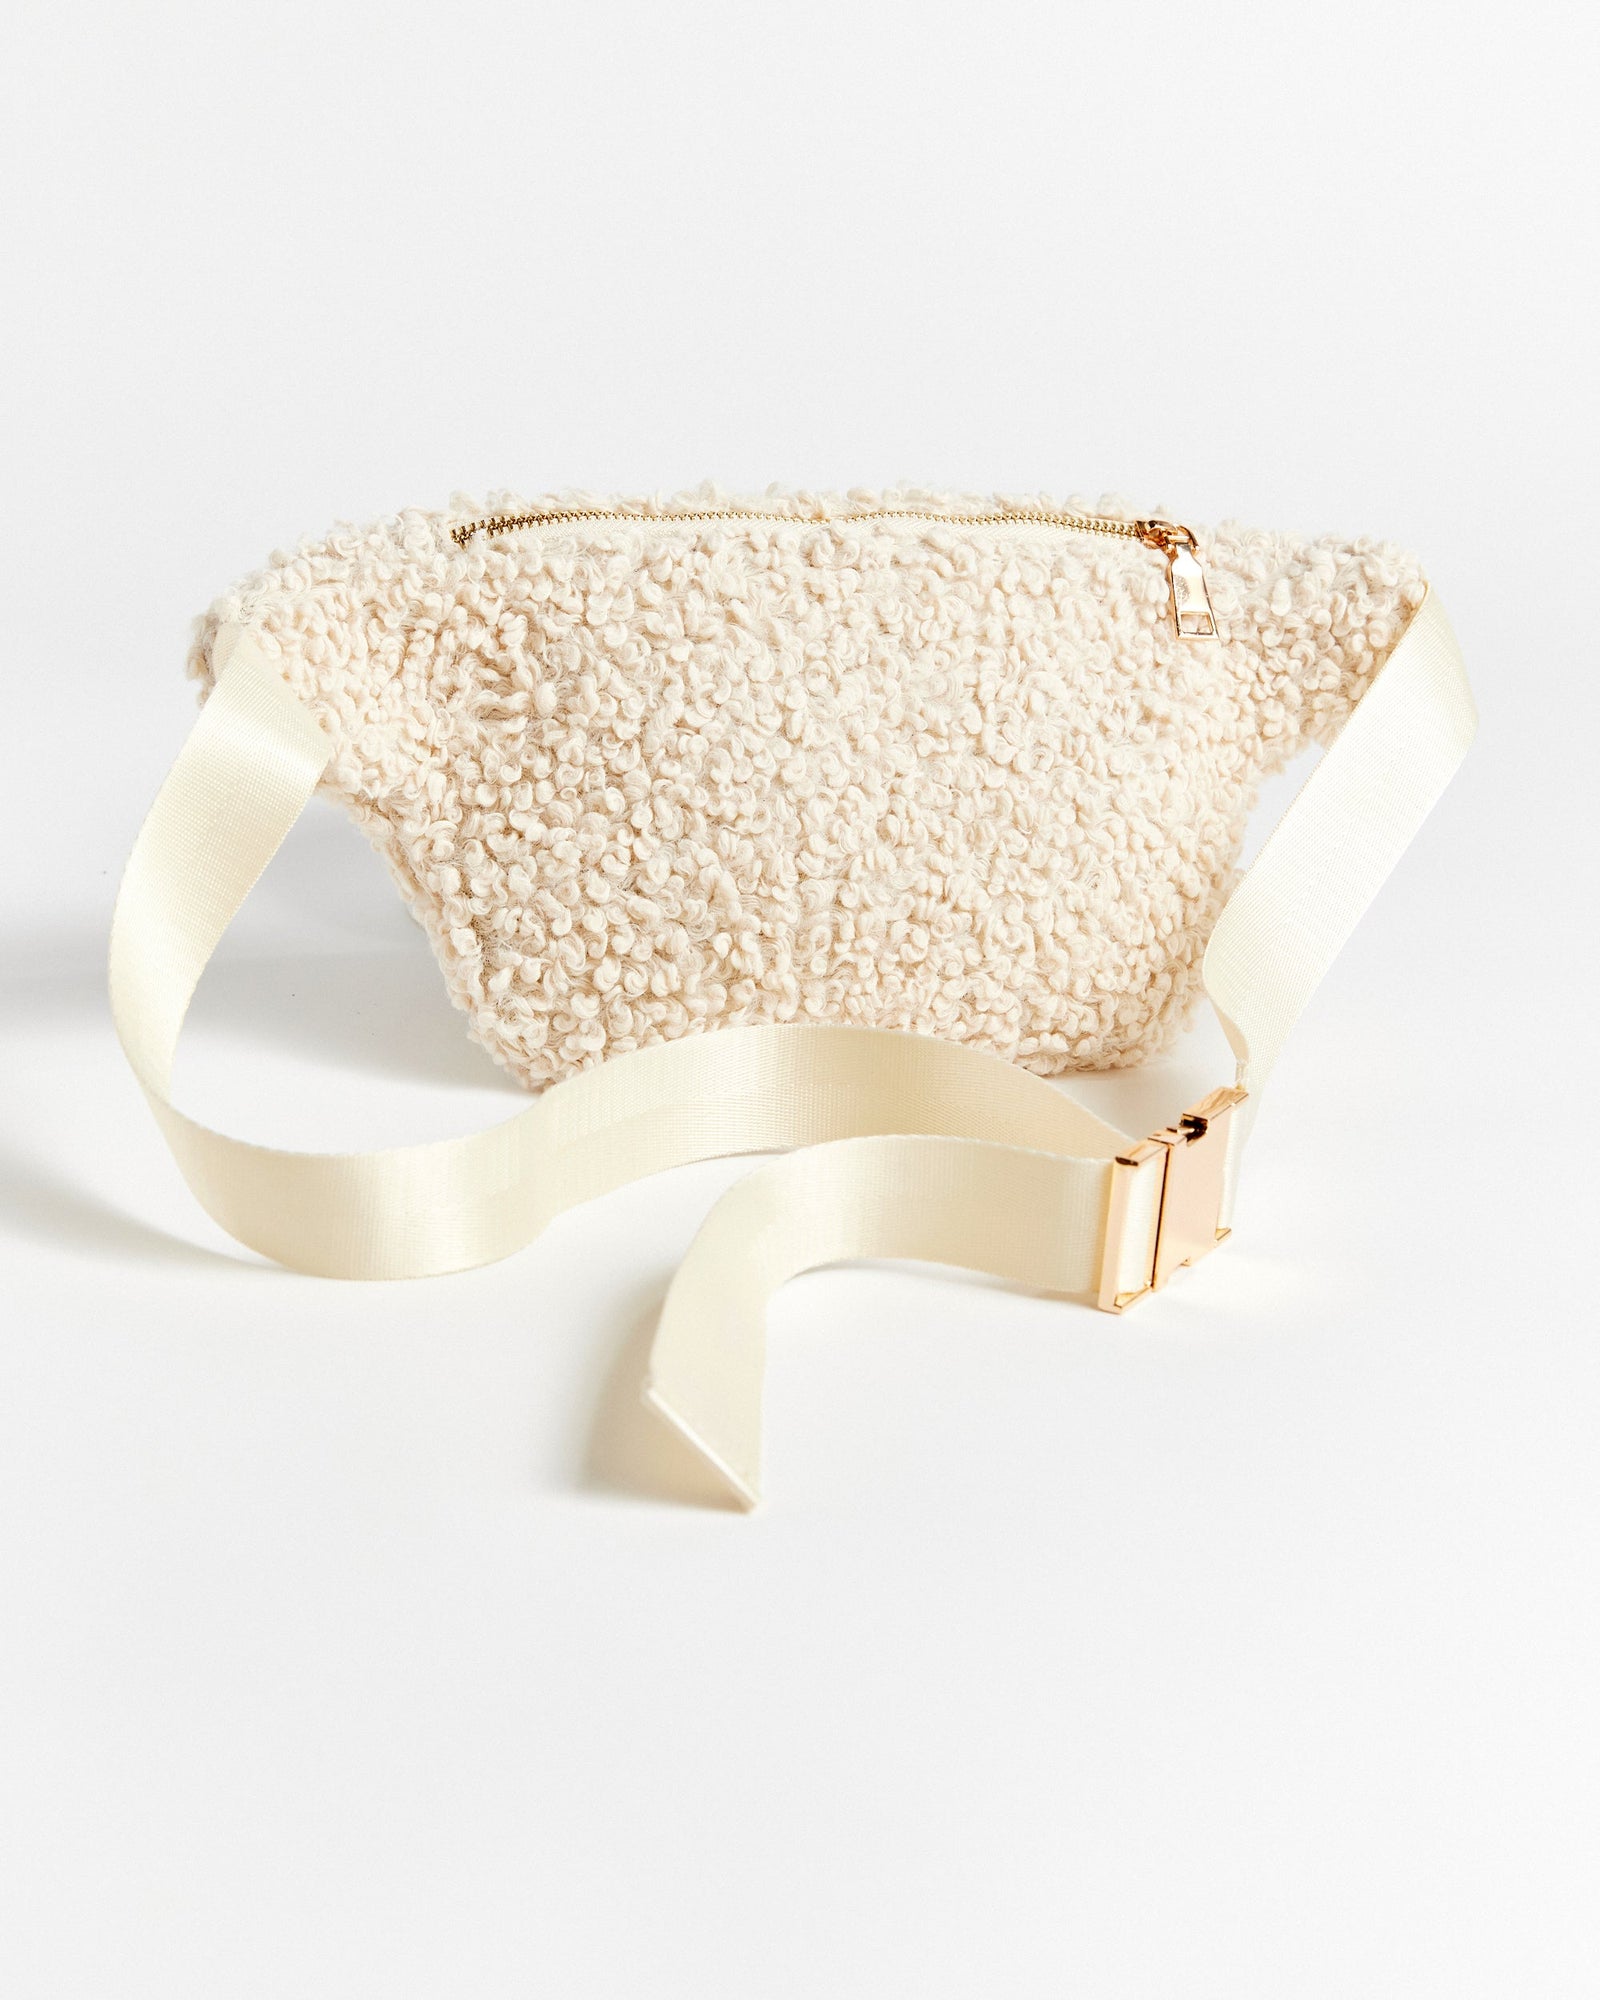 J'Adore Shearling Fanny Pack